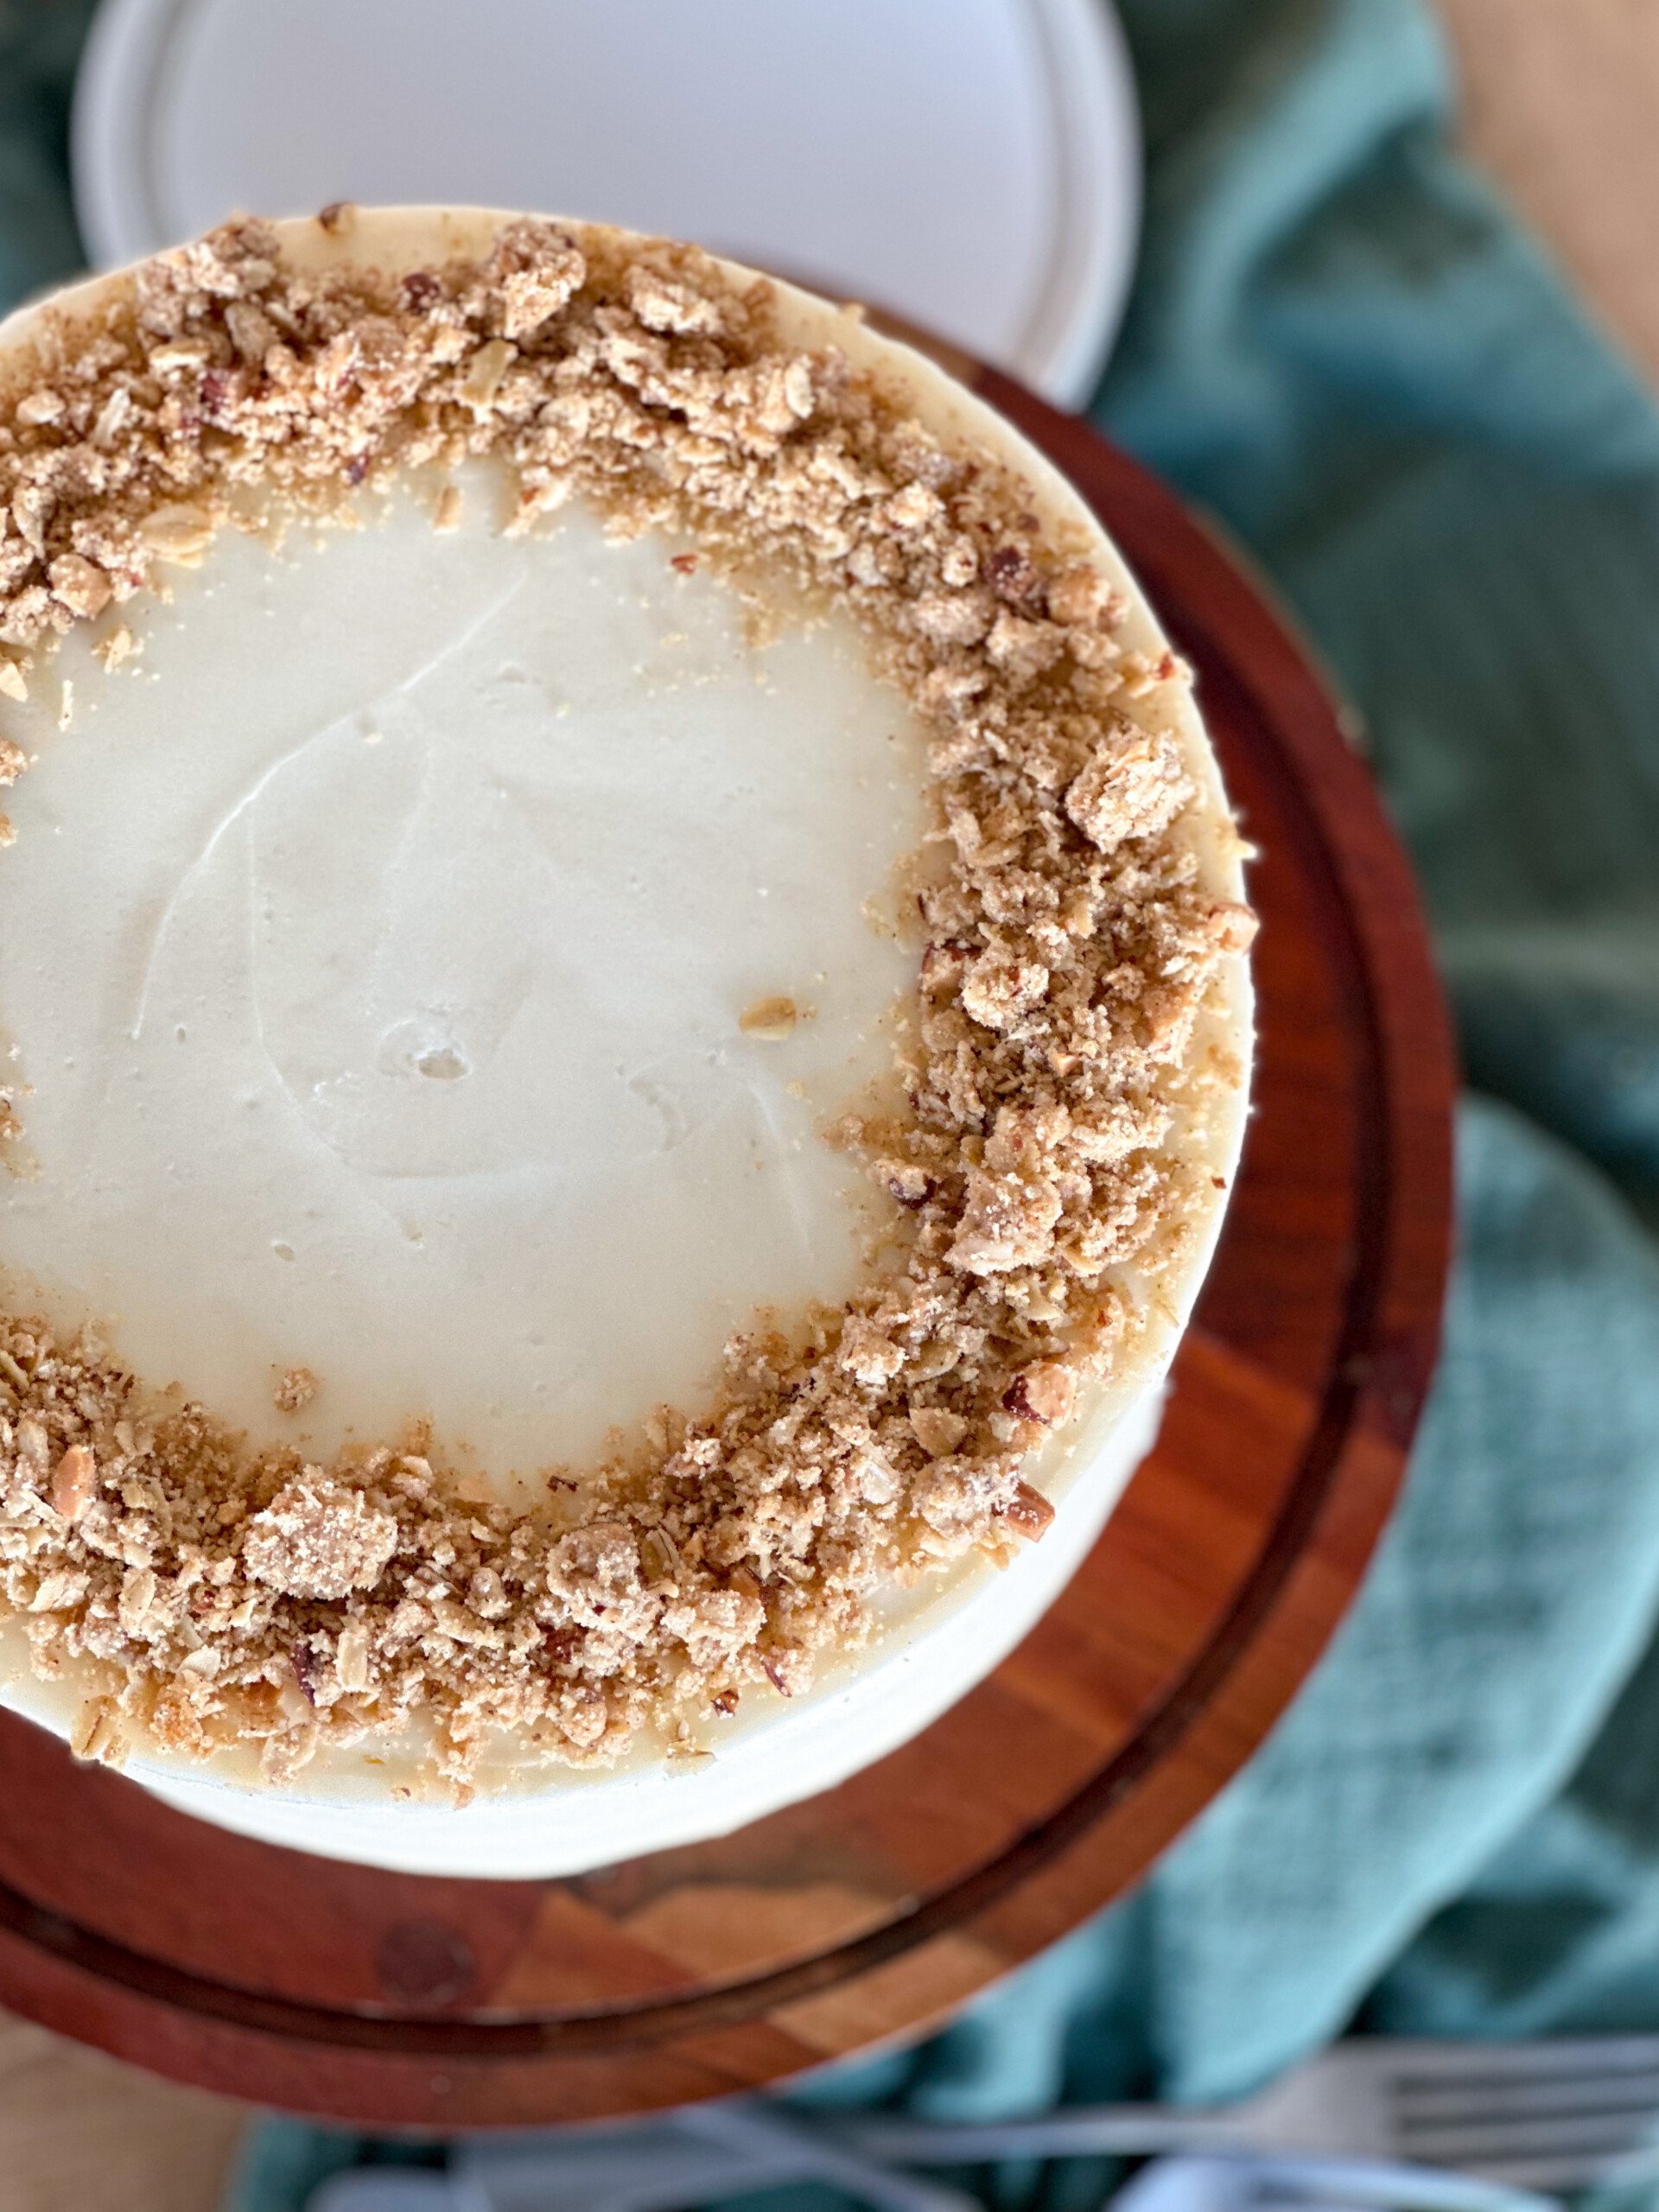 Top view of a pear crisp cake.